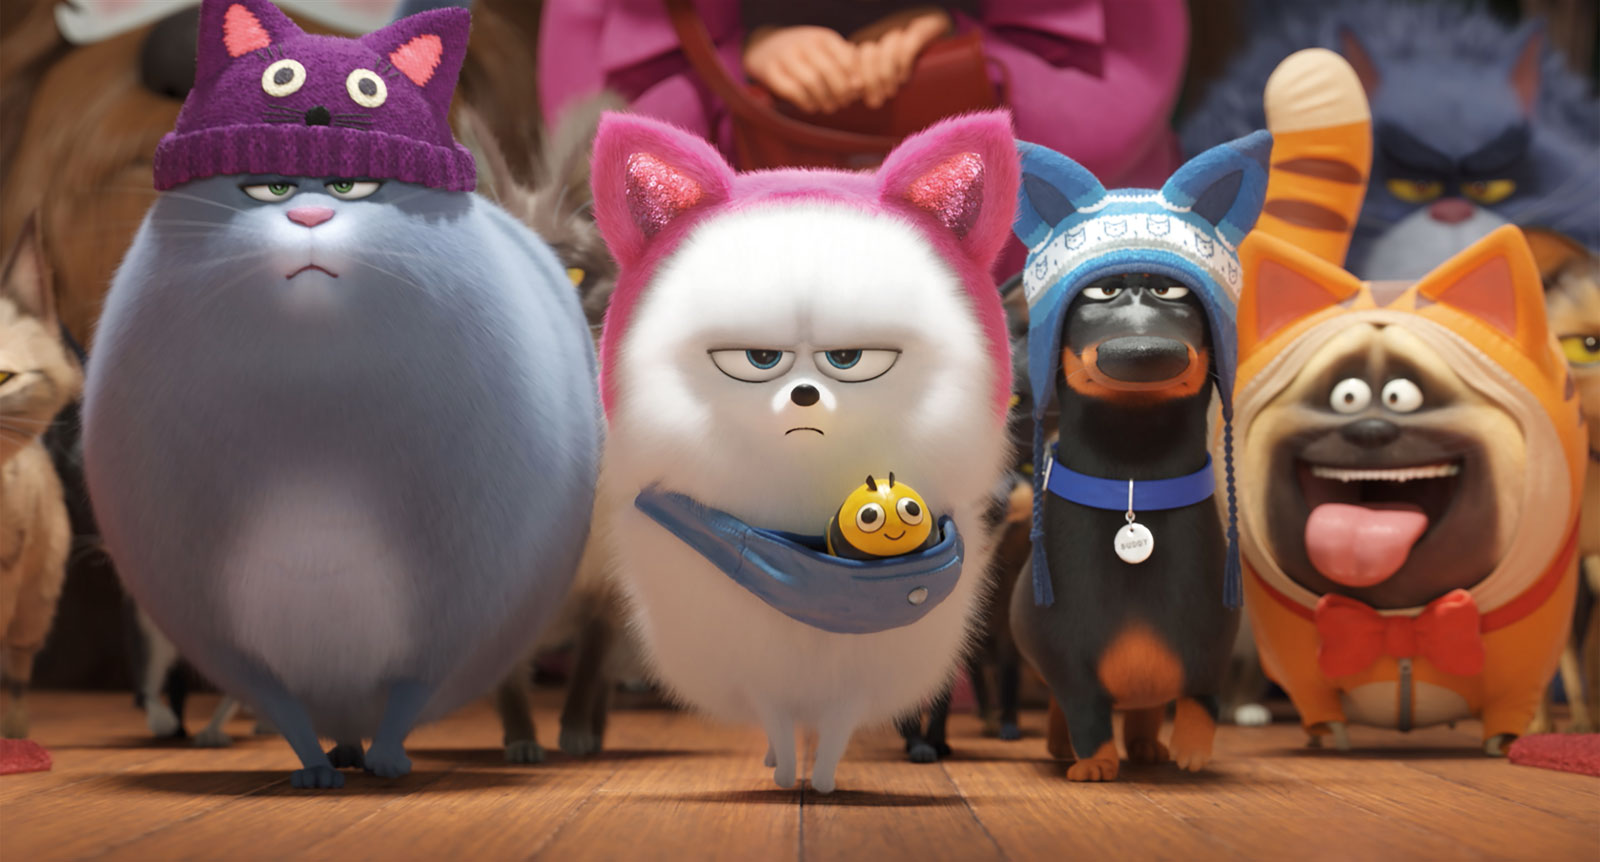 slop 2 - Secret Life of Pets Debuts Woefully, Blockbuster Countdown Begins For Bling Lagosians +Top 5 Box Office.